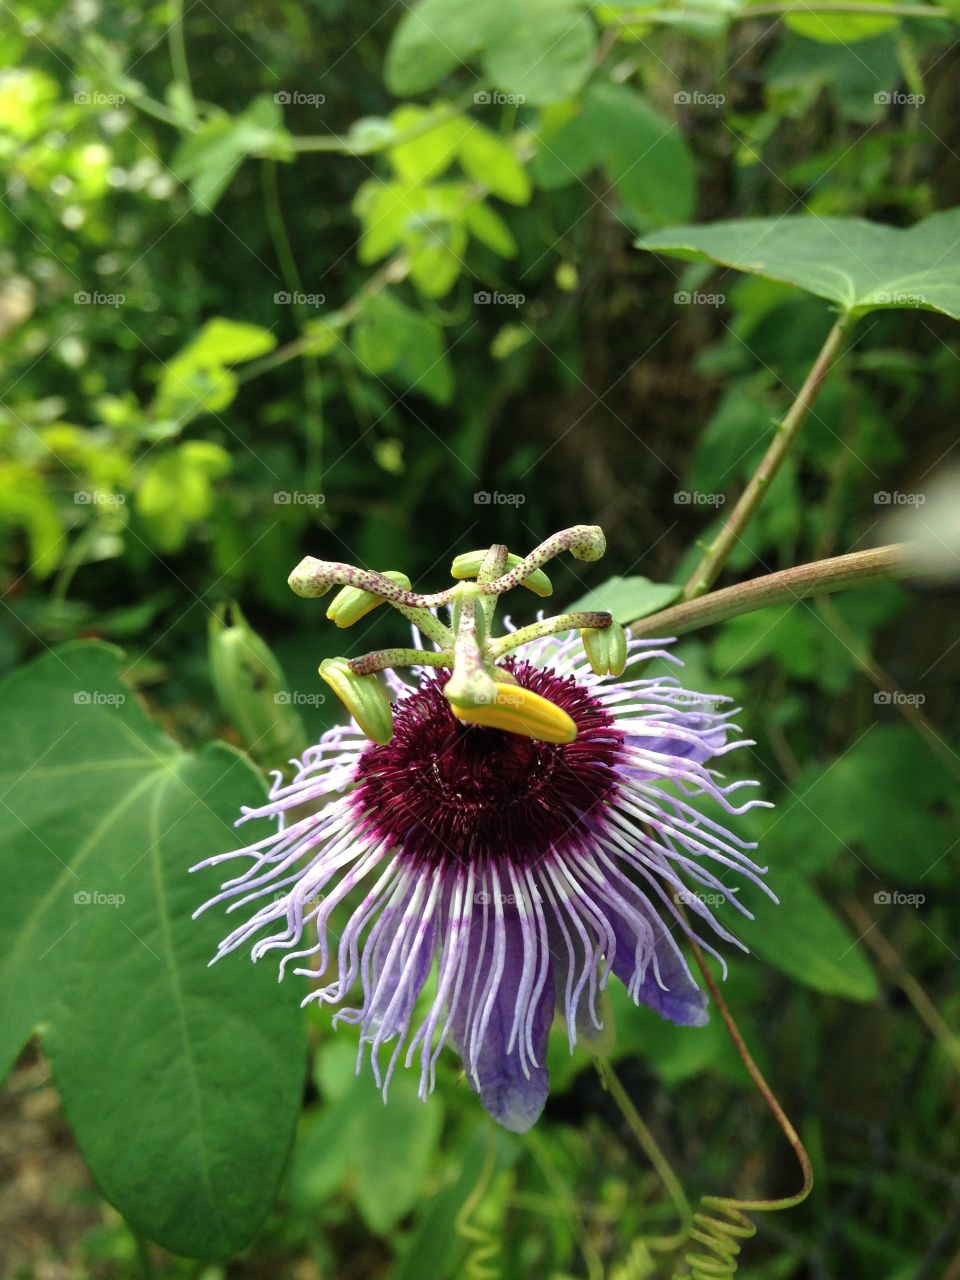 In the 16th century, when Christian  Passion fruit flowermissionaries landed in South America, the passion flower was the plant that signified their success. They believed that the flower symbolized the death of Christ; the five petals represented the disciples (minus Peter and Judas), the corona symbolizes the crown of horns around Christ's head, and other features were a symbol of the wounds, nails, and whips used on Christ.  